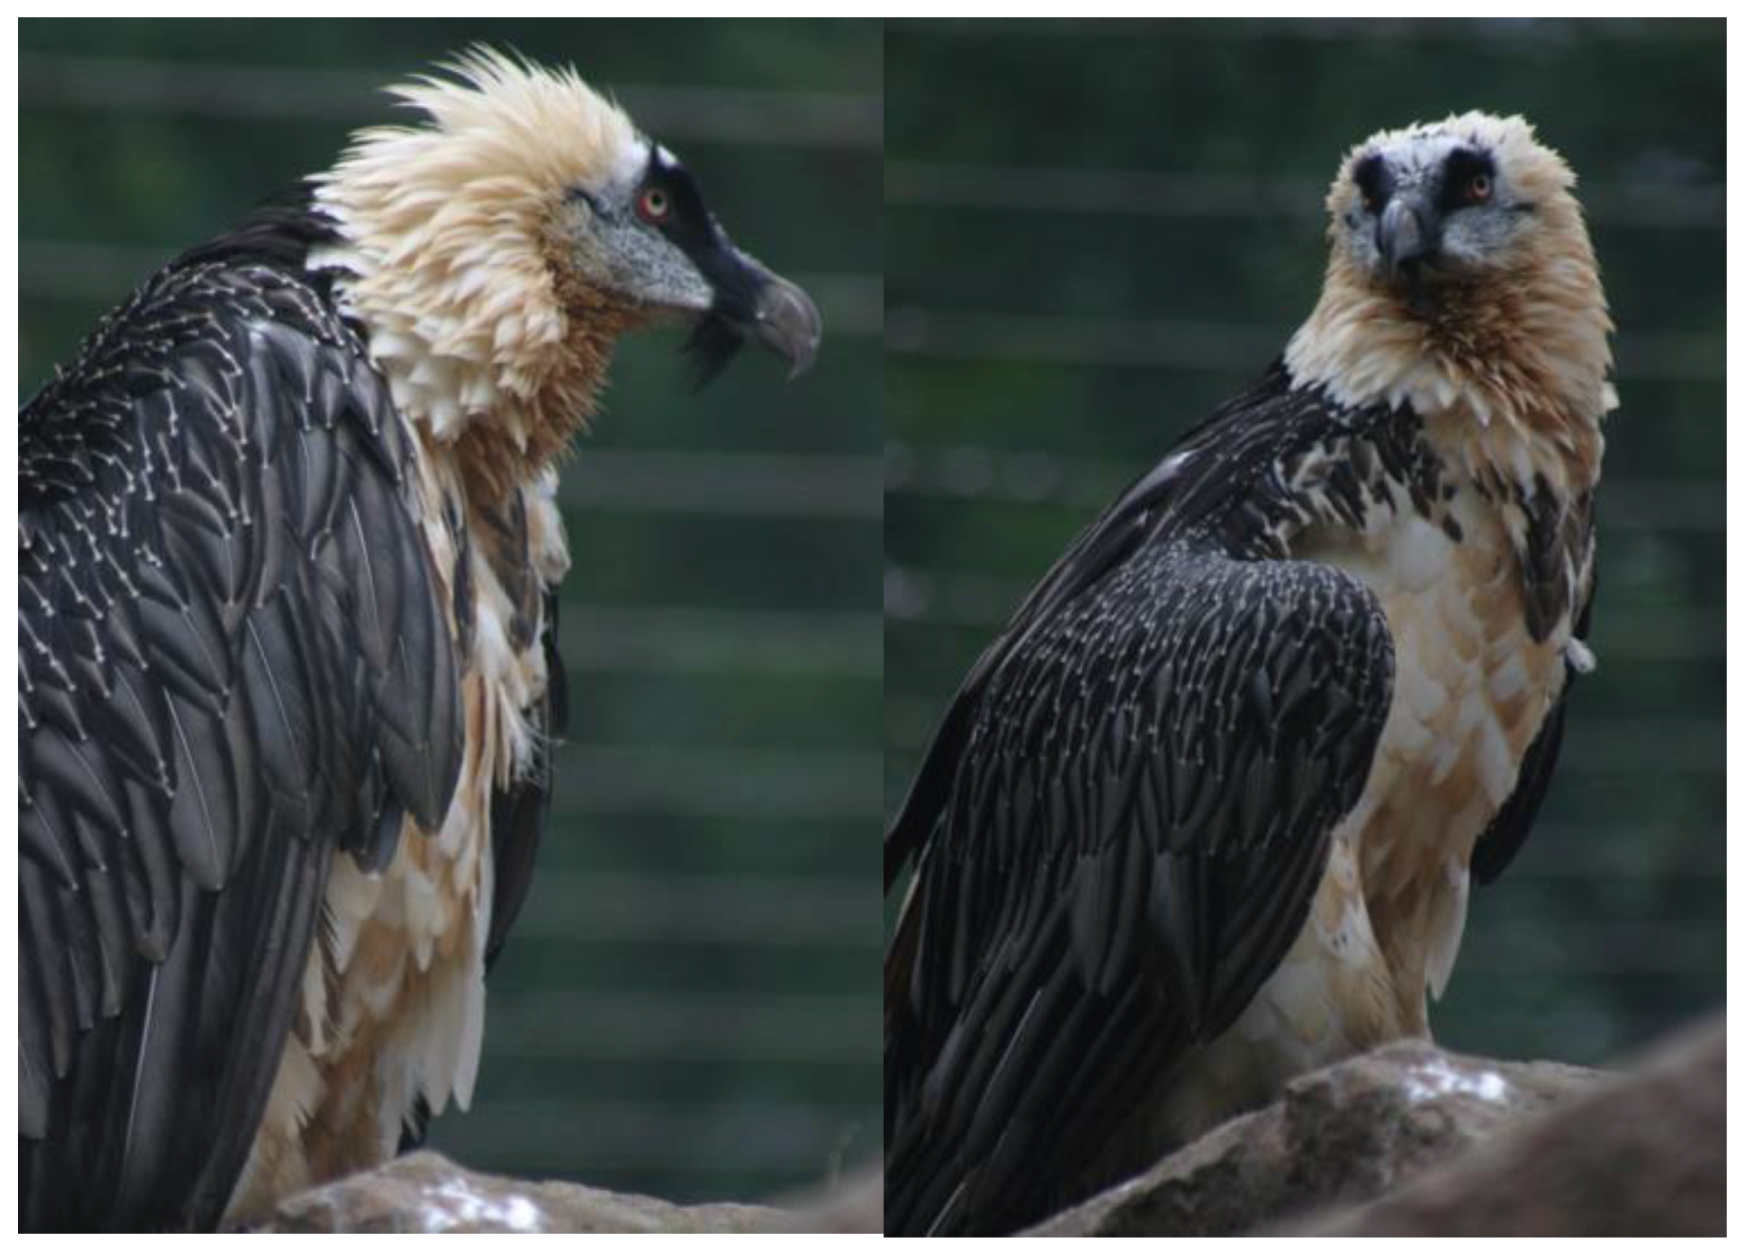 Animals | Free Full-Text | Ochre Bathing of the Bearded Vulture: A ...